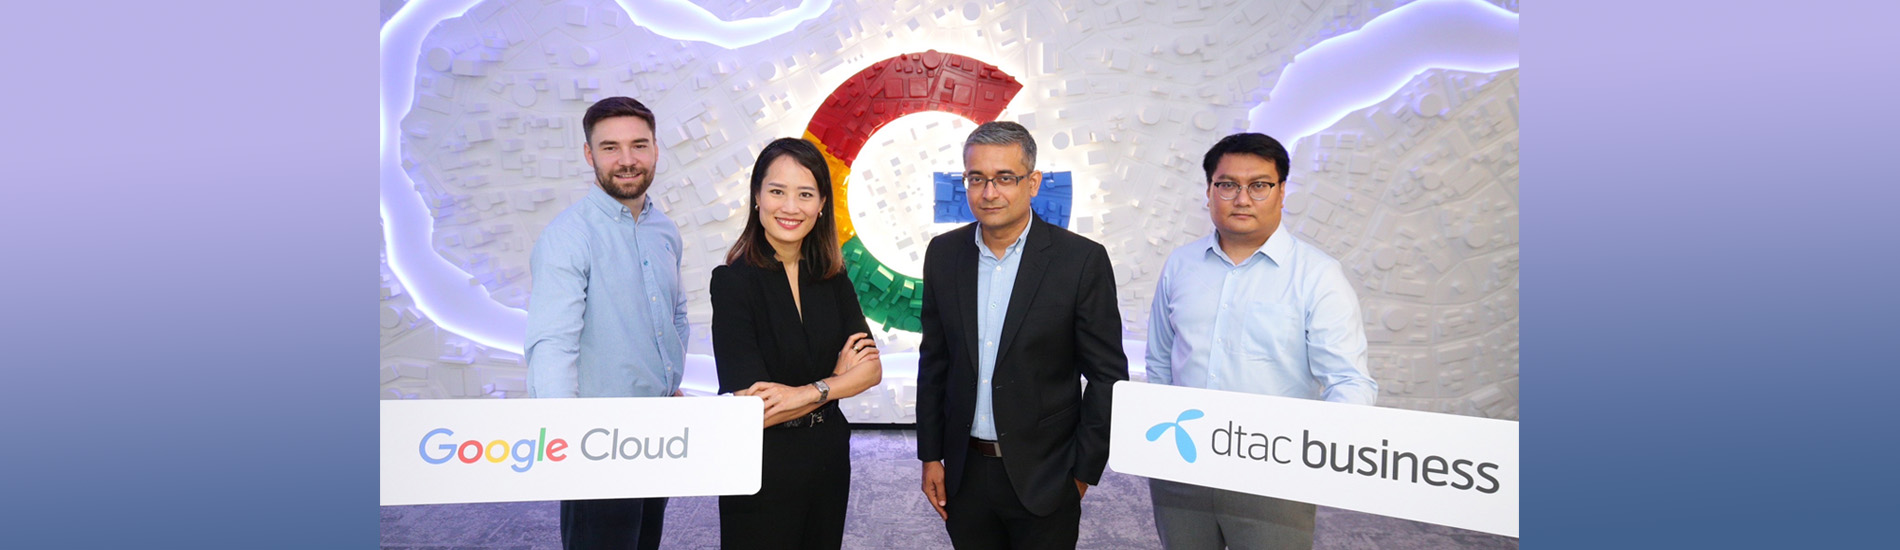 Dtac, Telenor, and Google Cloud to Empower Thai Businesses’ Digital Transfor